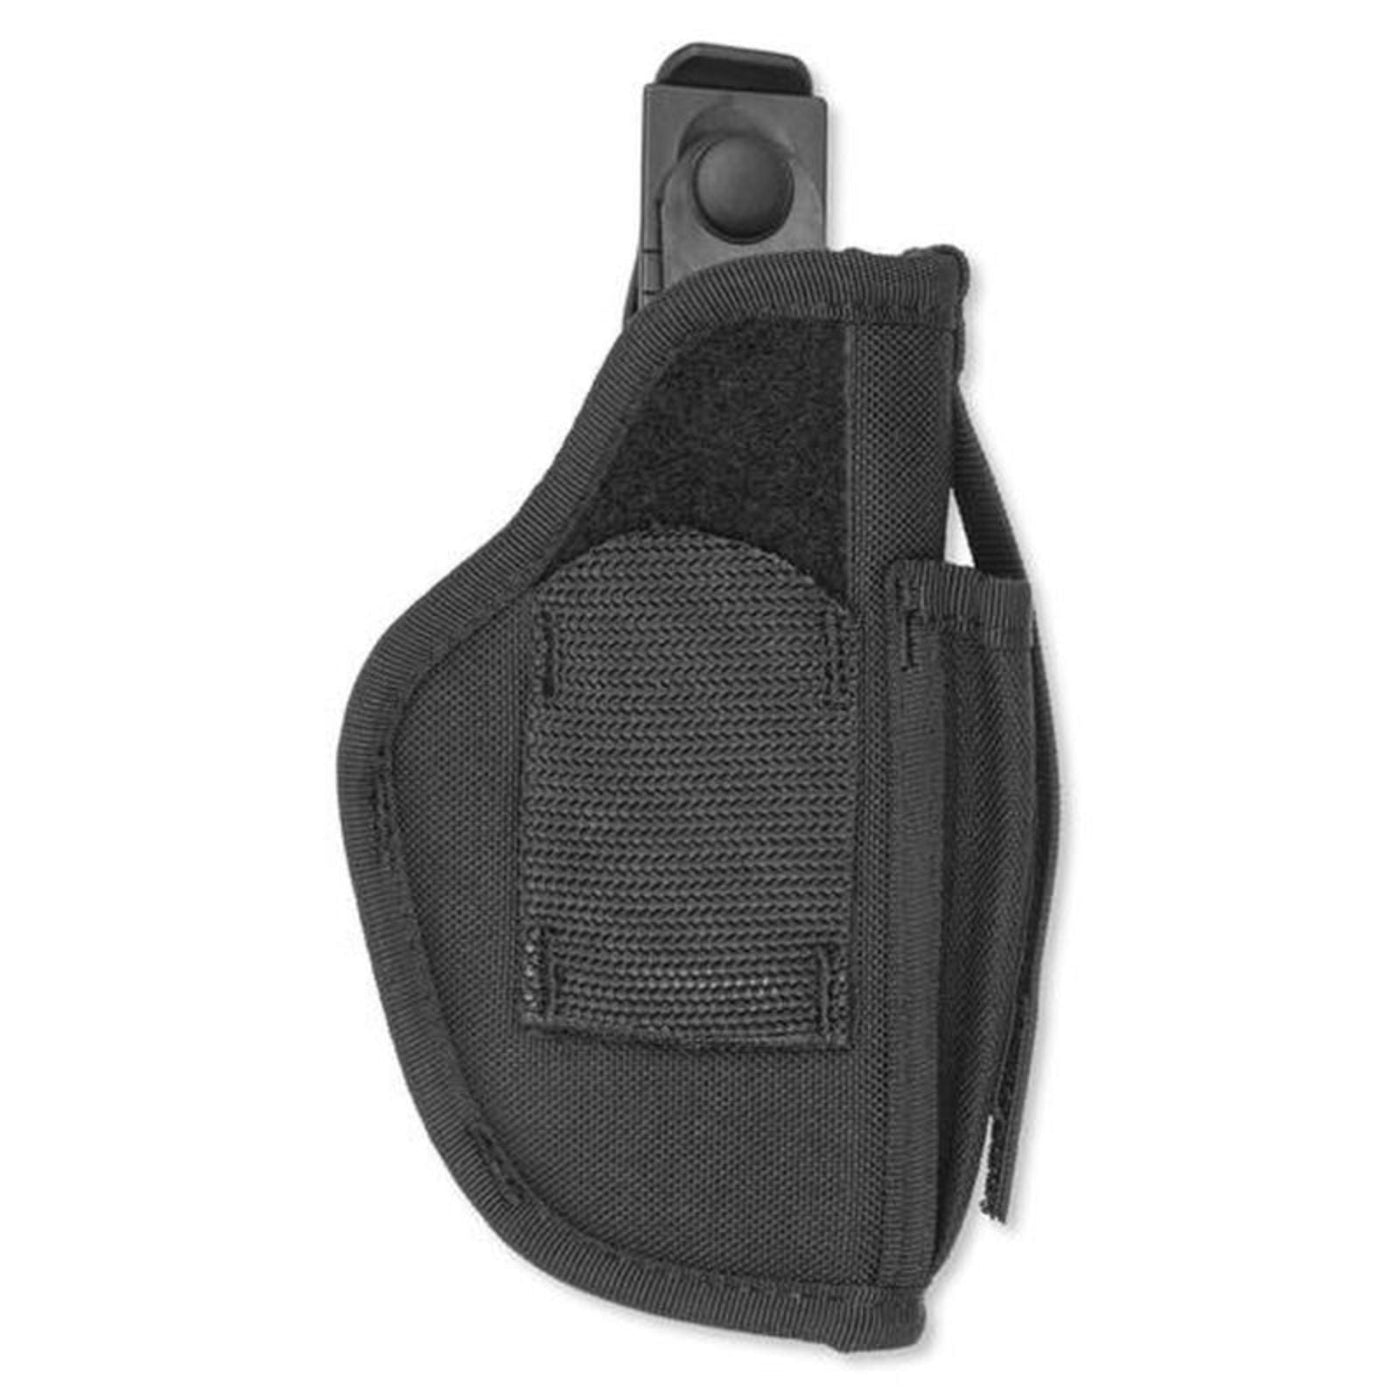 Uncle Mike's Uncle Mikes Sidekick Holster Kodra Ambi Mag Pouch 16 Shooting